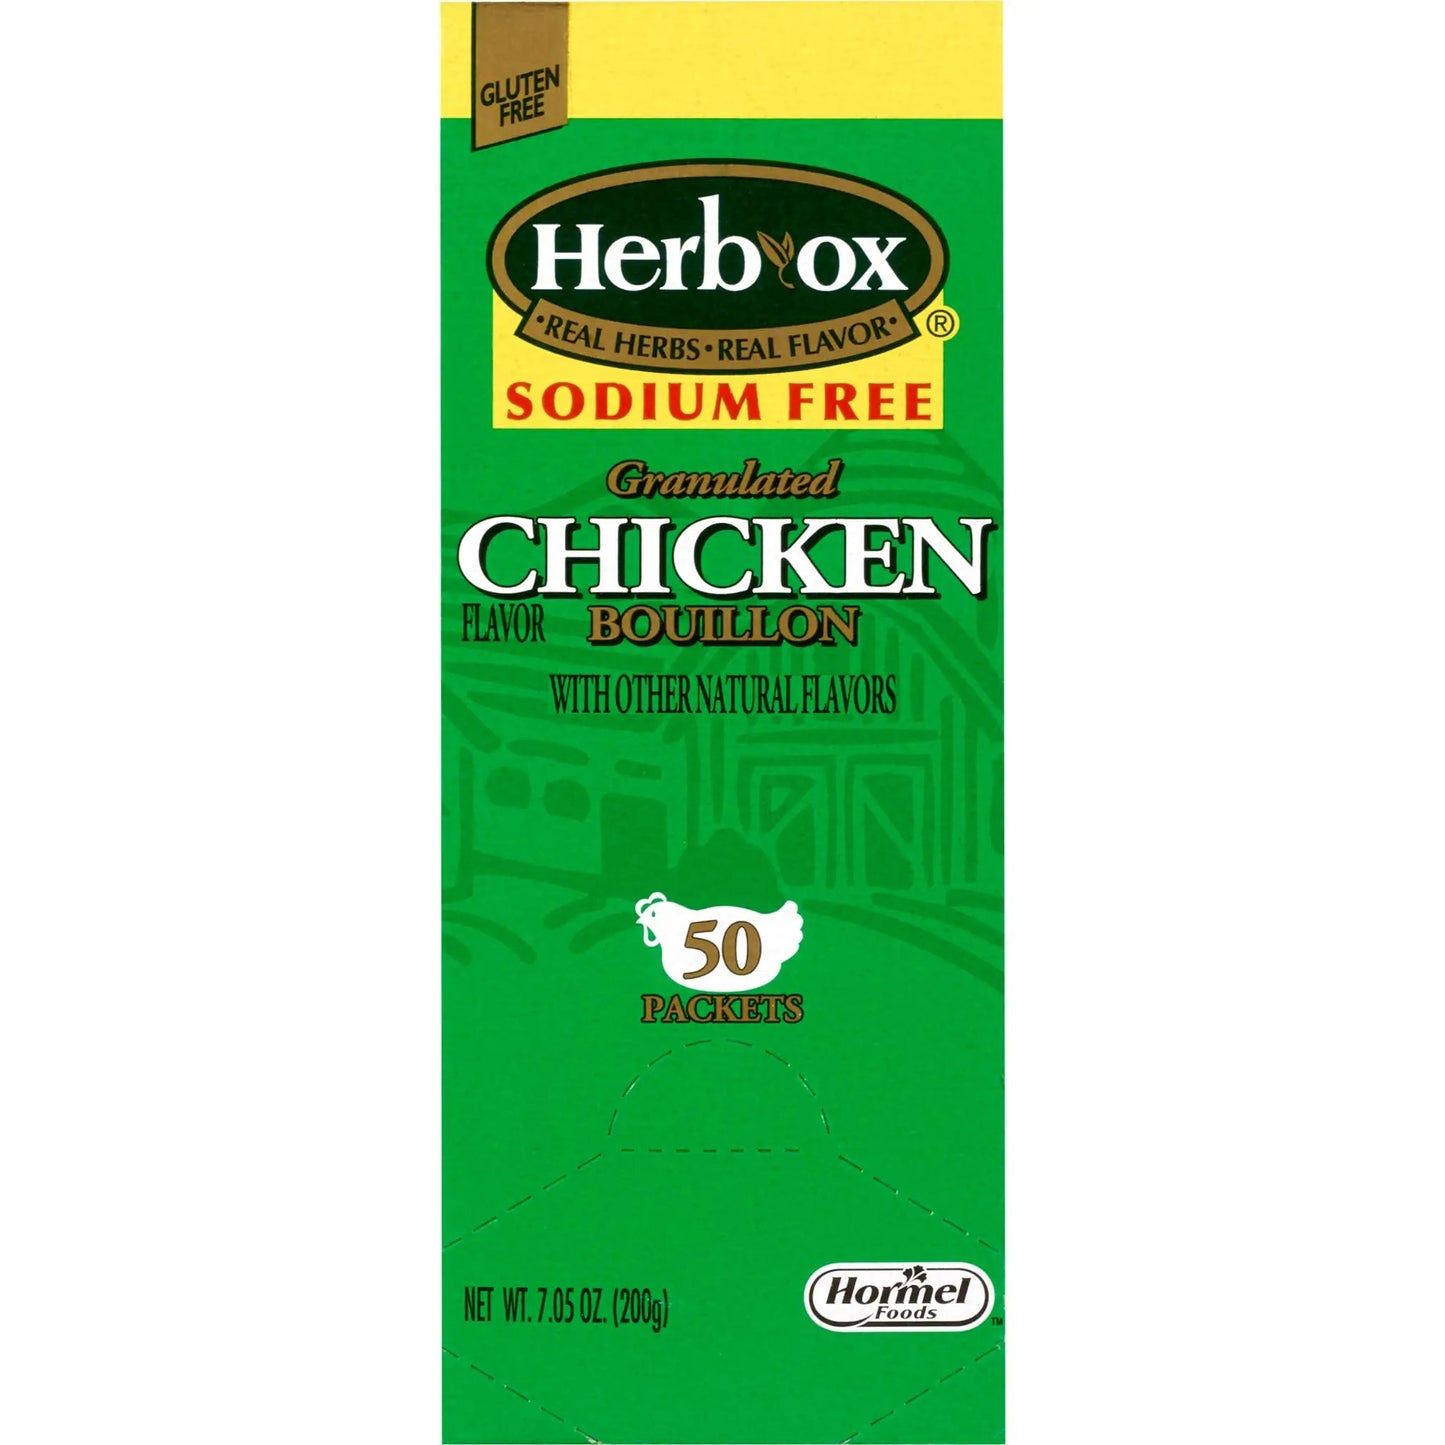 Herb-Ox Chicken Bouillon Sodium Free Instant Broth, 50 Packets per Box